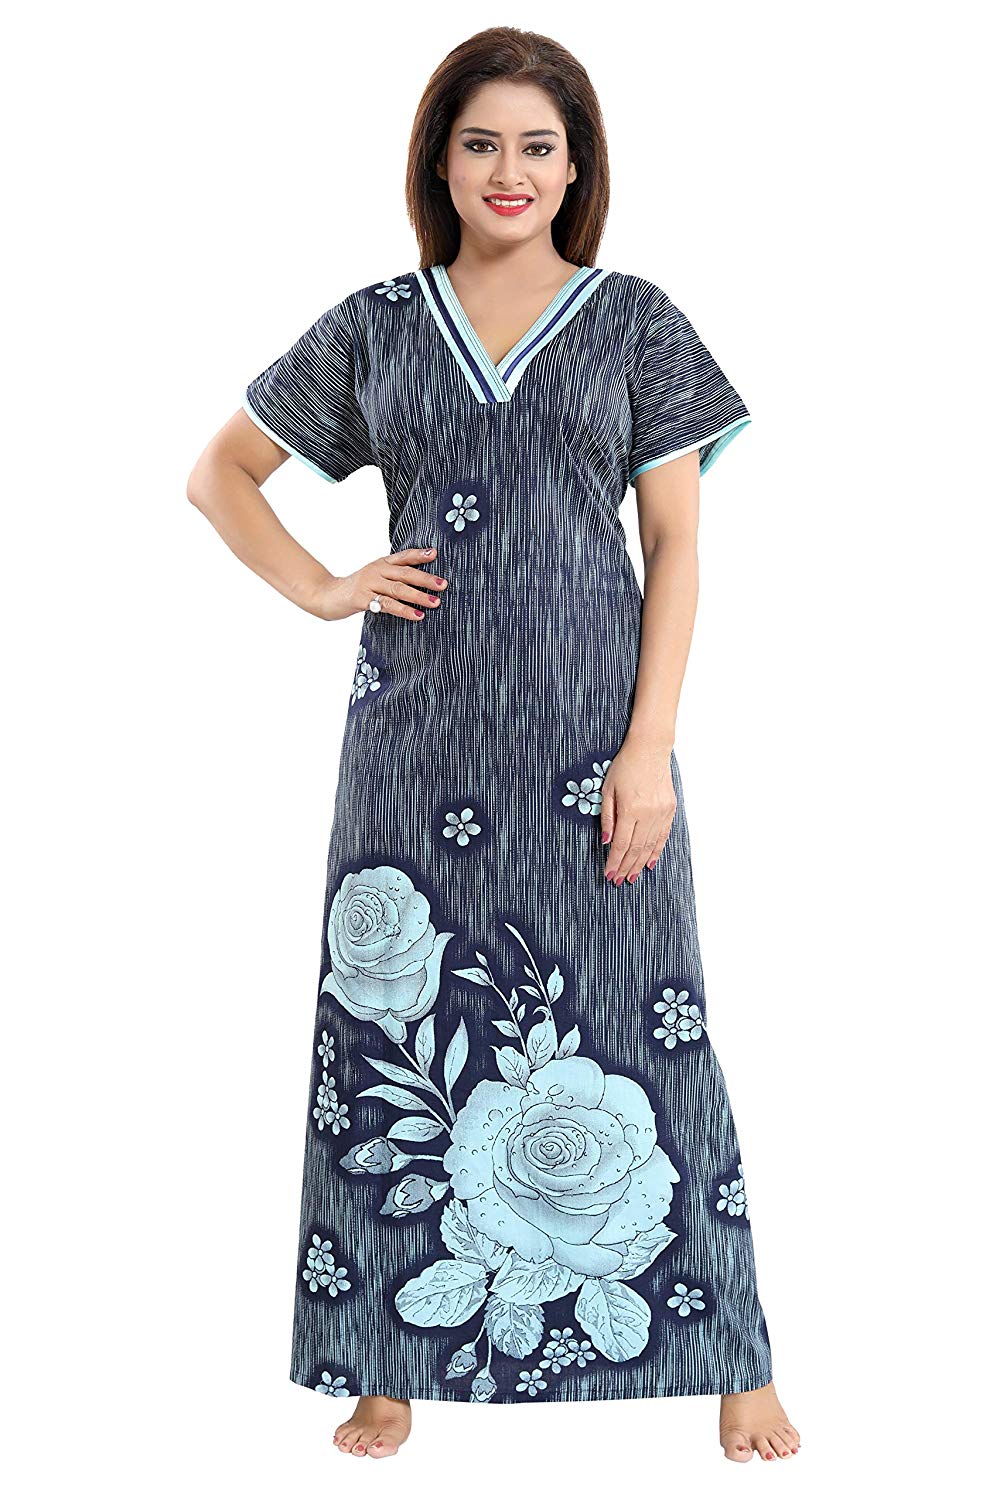 5XL Size Sleepwear: Buy 5XL Size Sleepwear for Women Online at Low Prices -  Snapdeal India